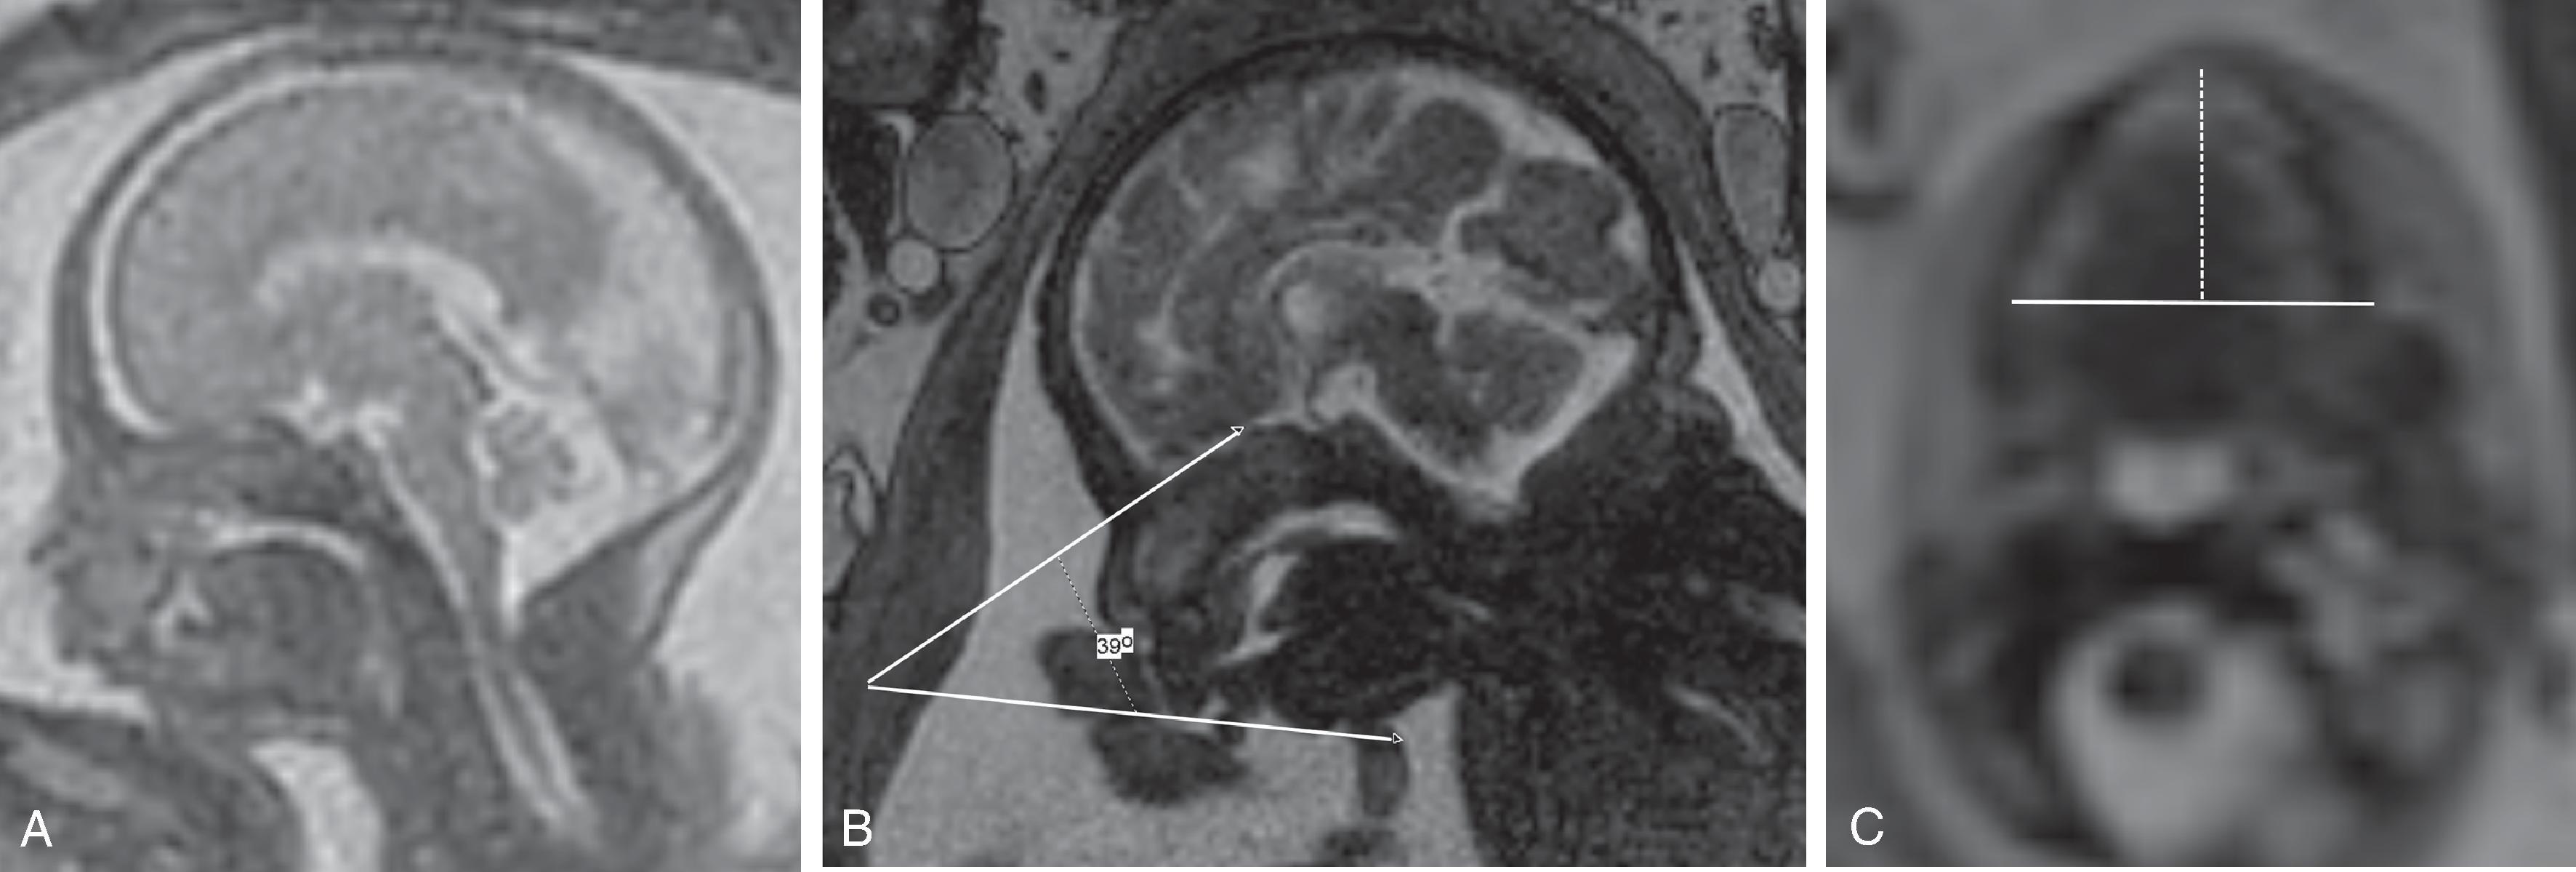 Fig. 12.27, Pyriform Aperture Stenosis . Axial CT image demonstrates narrow bilateral pyriform apertures.